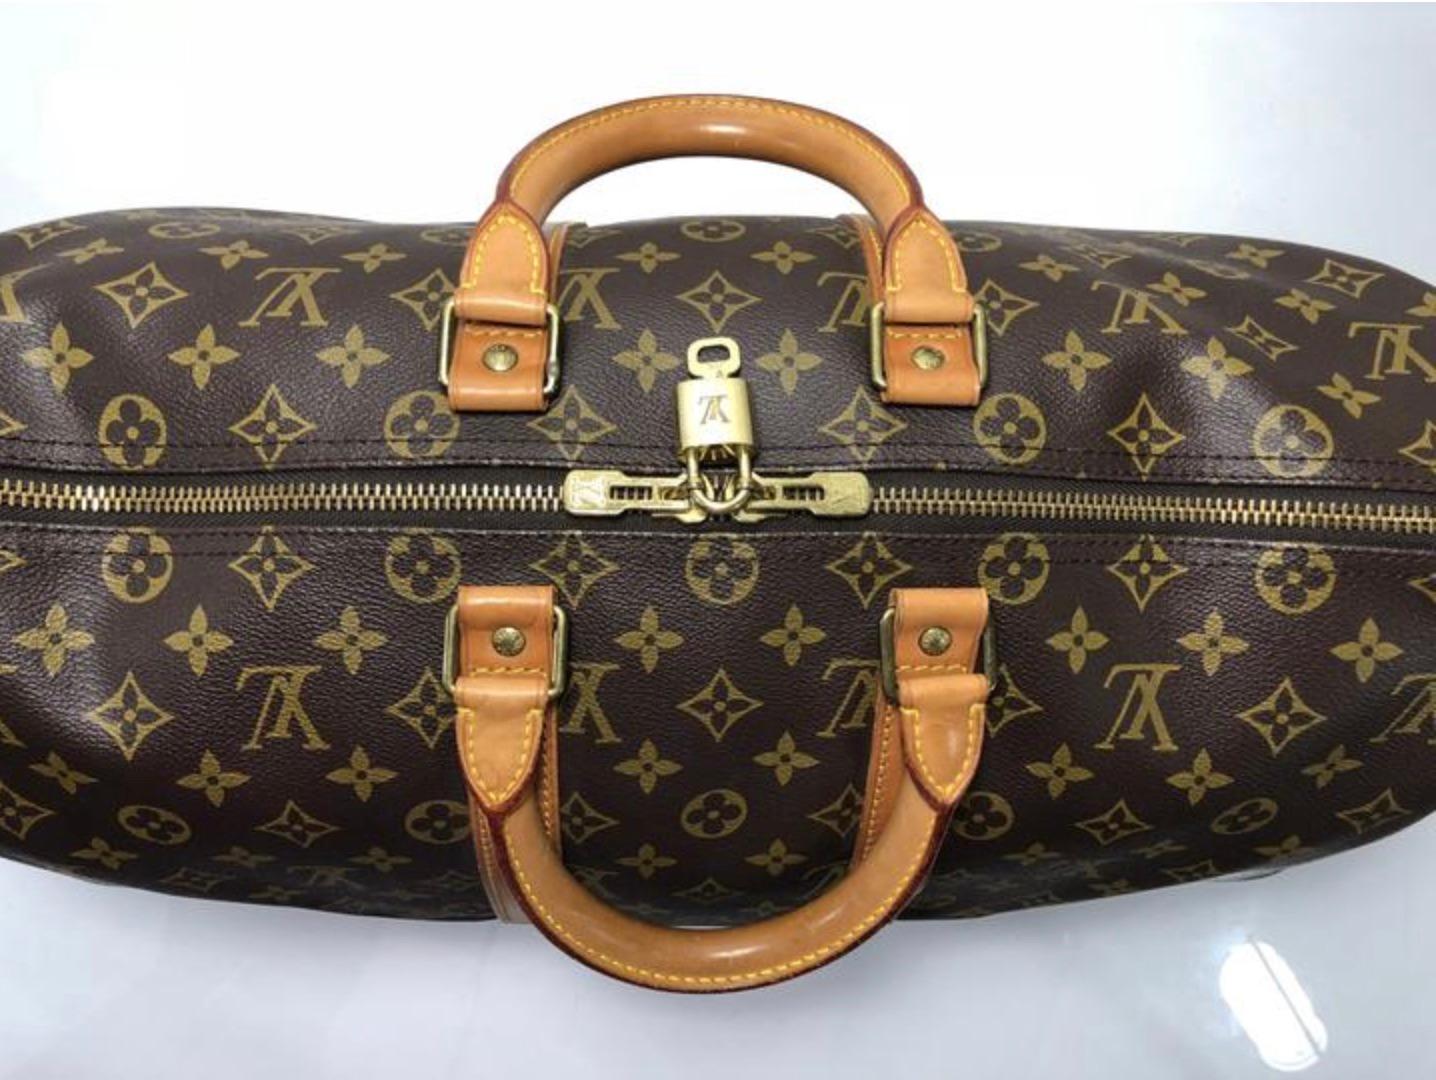 Louis Vuitton Monogram Keepall 45 Travel Handbag In Good Condition For Sale In Saint Charles, IL